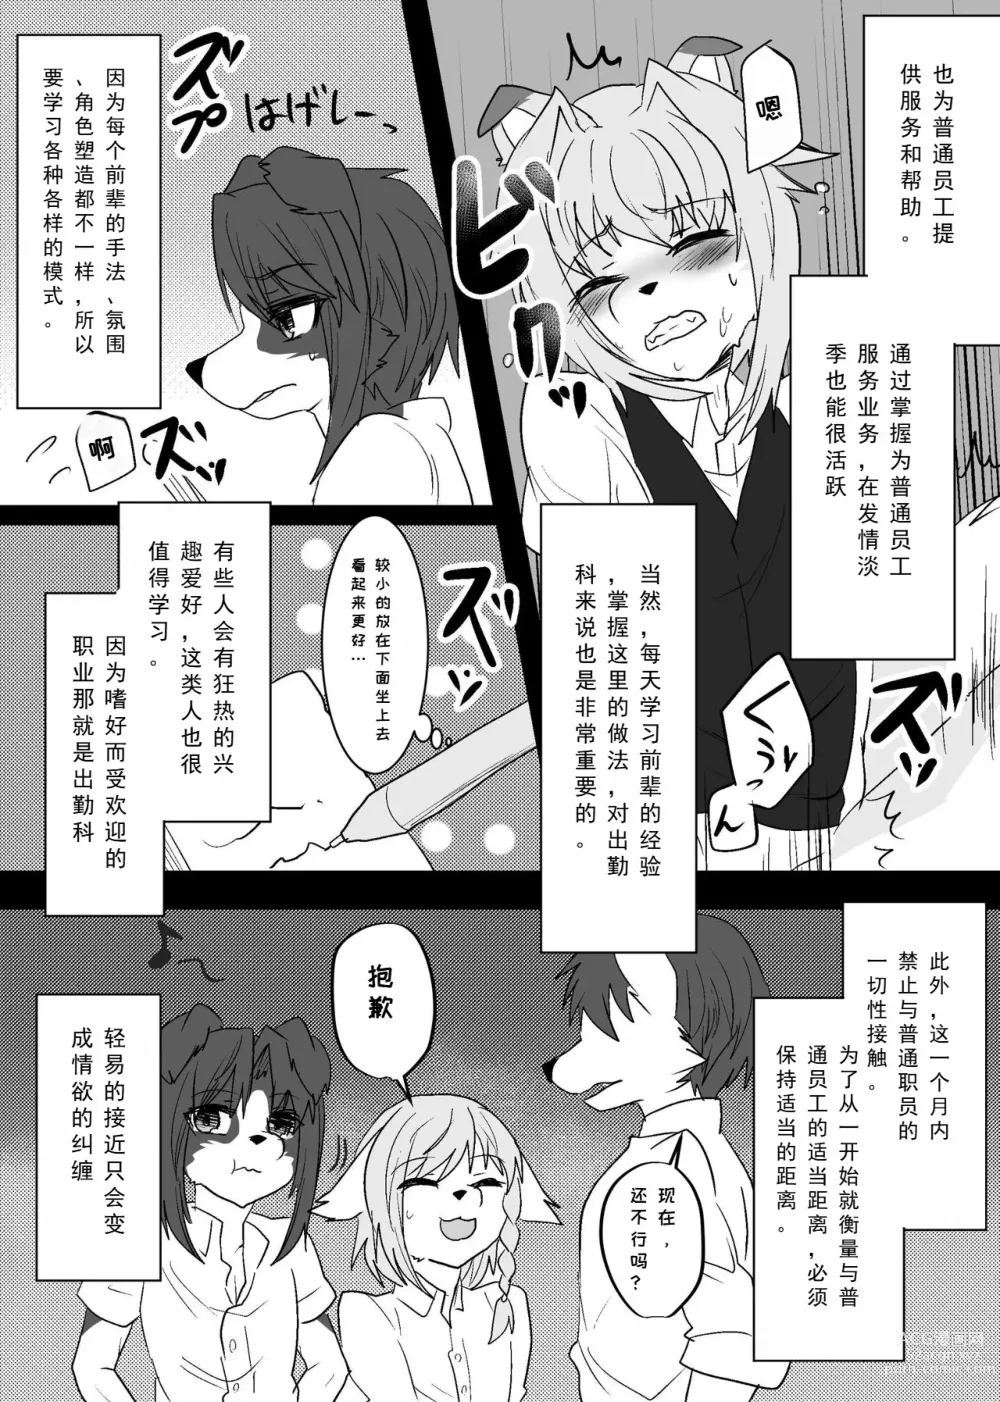 Page 7 of doujinshi 我们发情出勤科 2